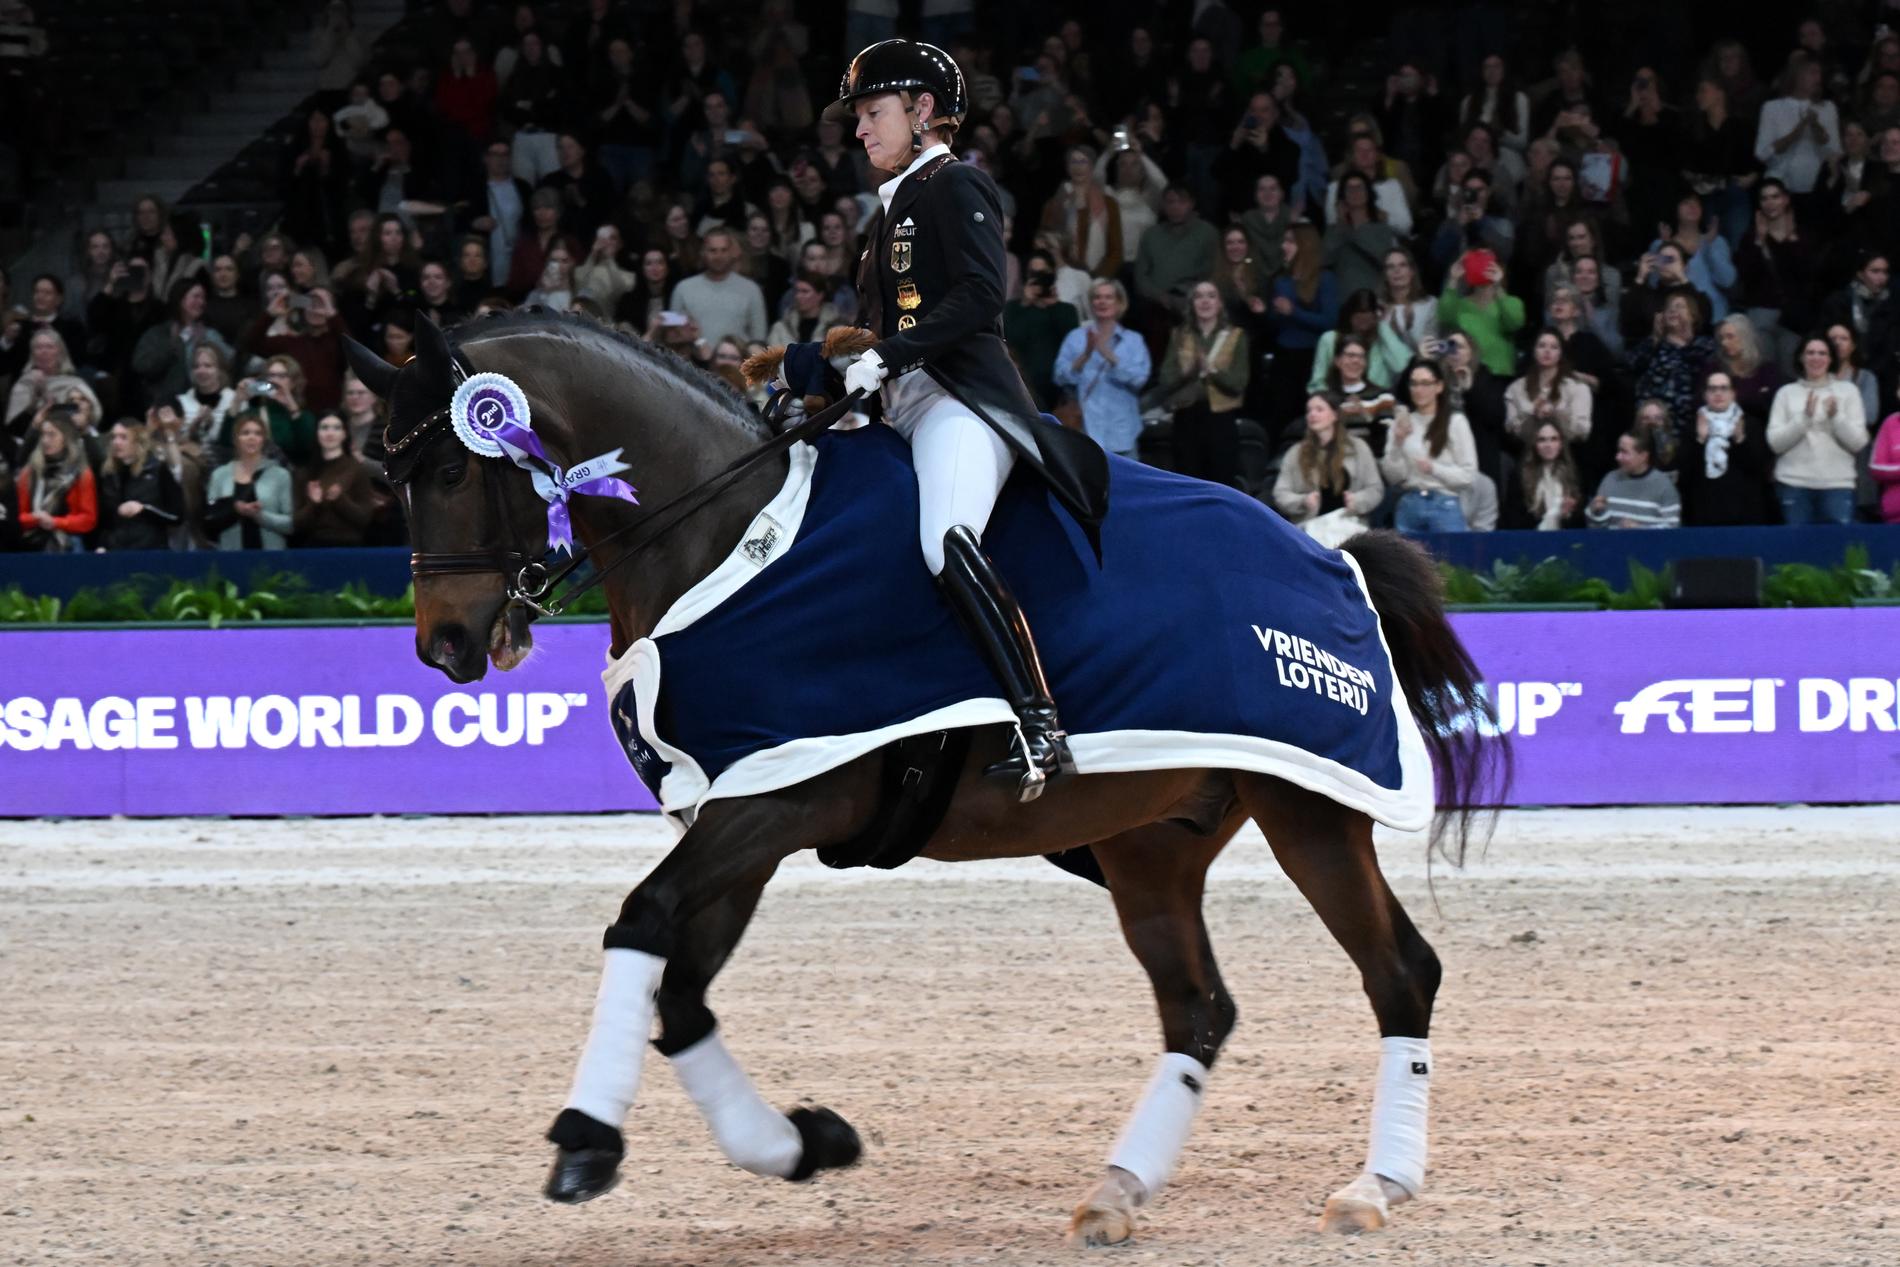  Isabell Werth with the horse DSP Quantaz at the award ceremony in Amsterdam.